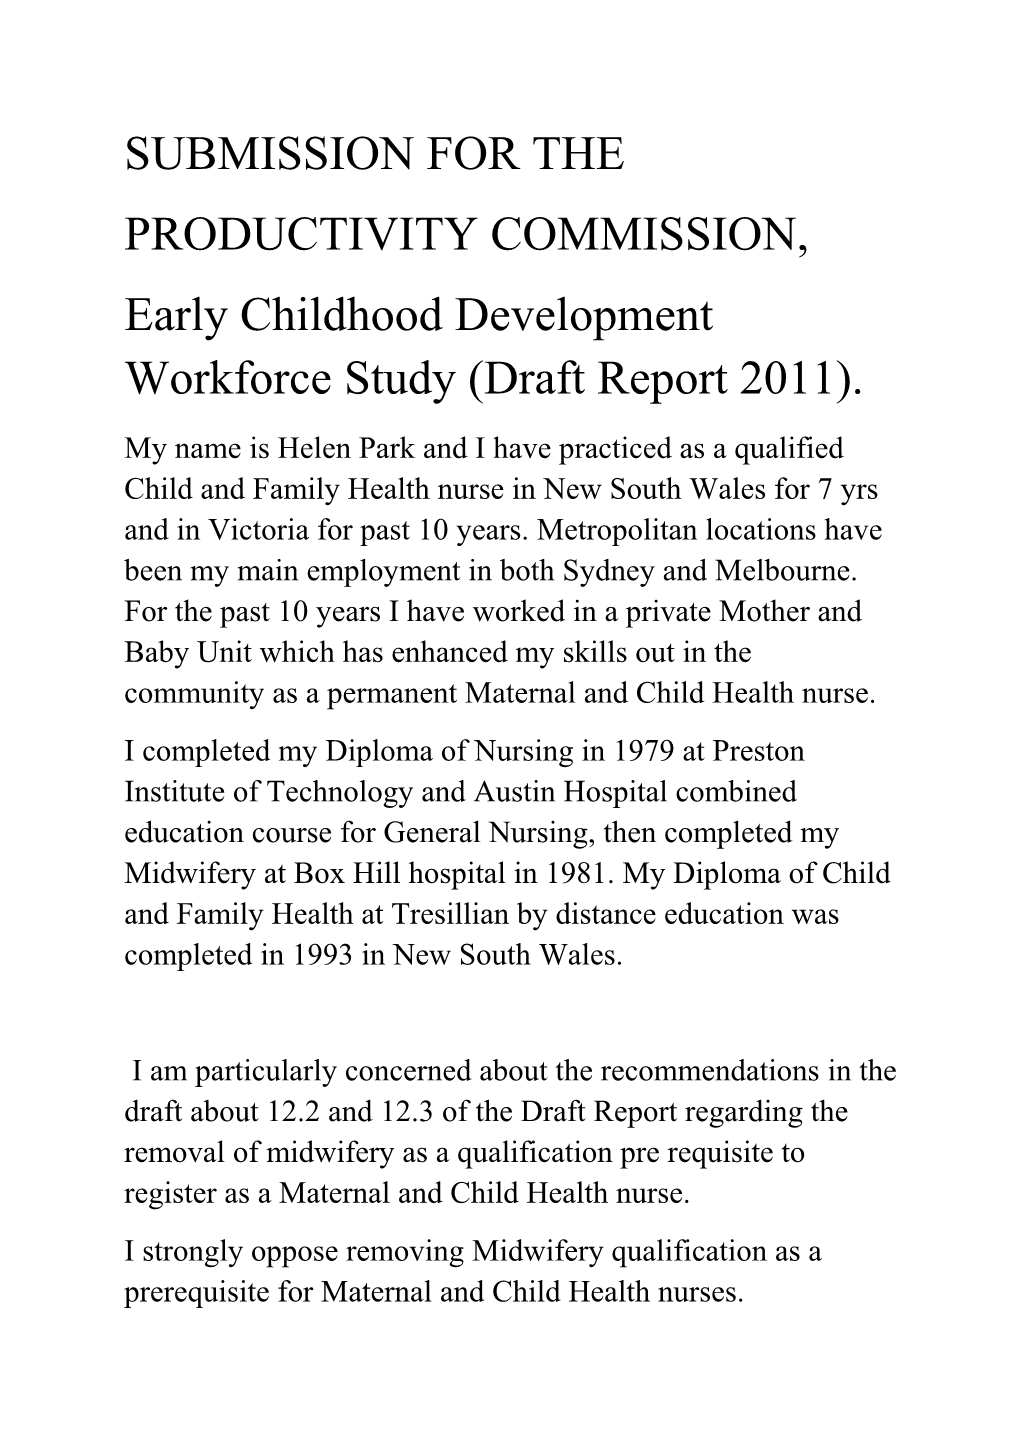 Submission DR353 - Helen Park - Education and Training Workforce: Early Childhood Development